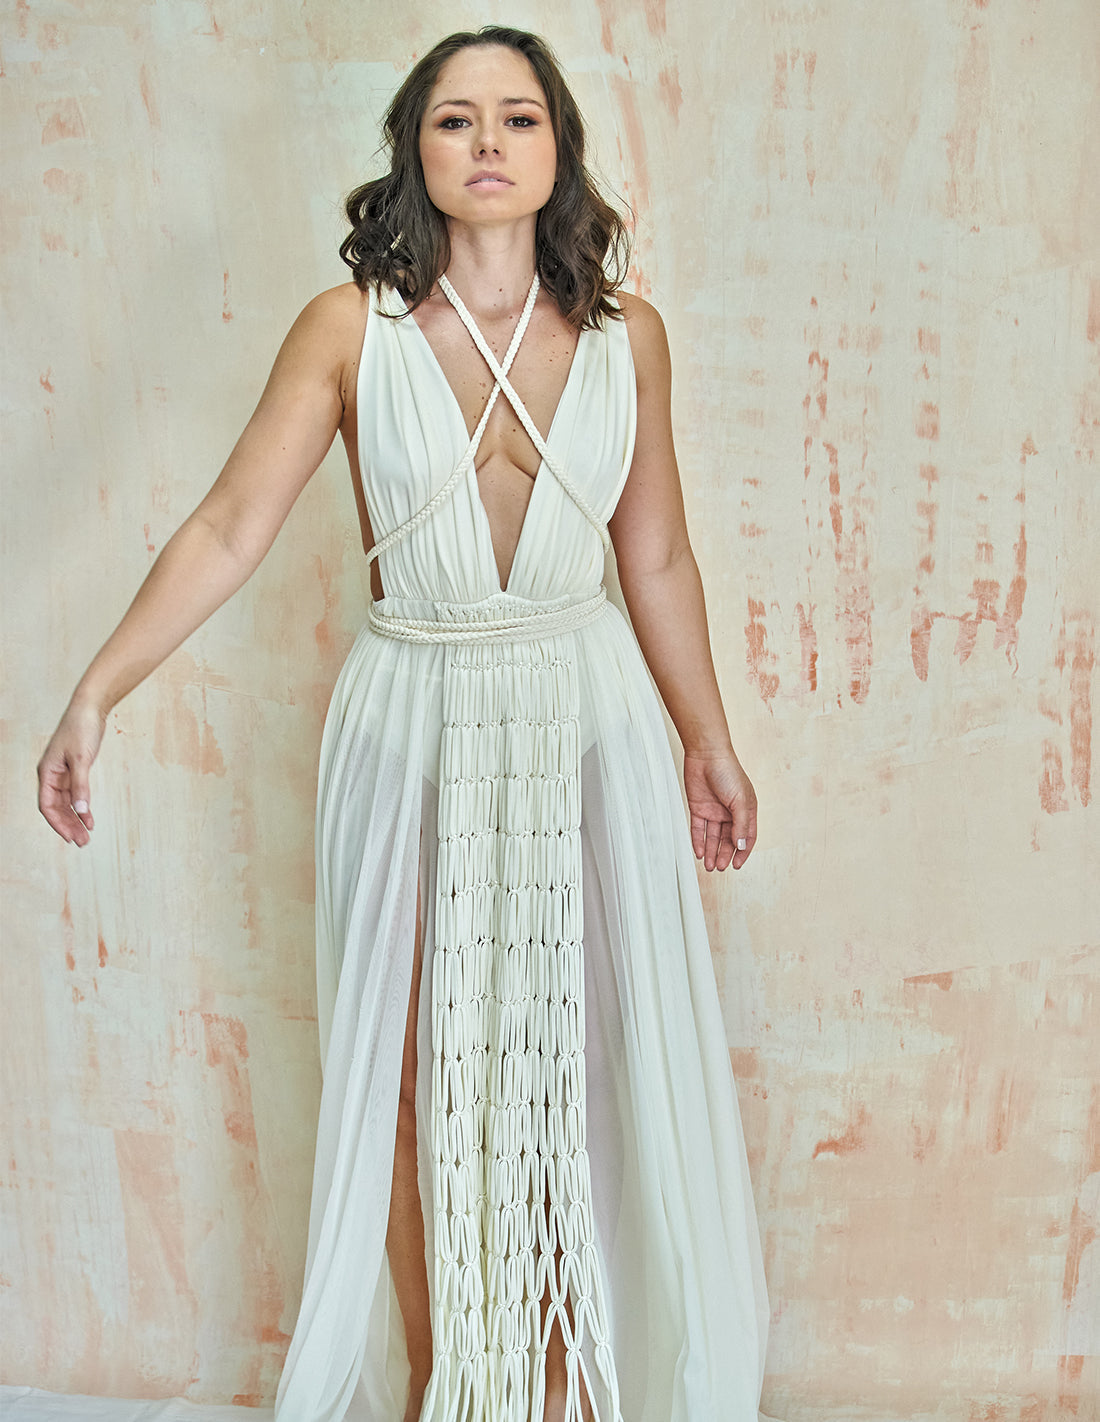 Diosa Dress Ivory. Dress With Hand Woven Macramé In Ivory. Entreaguas